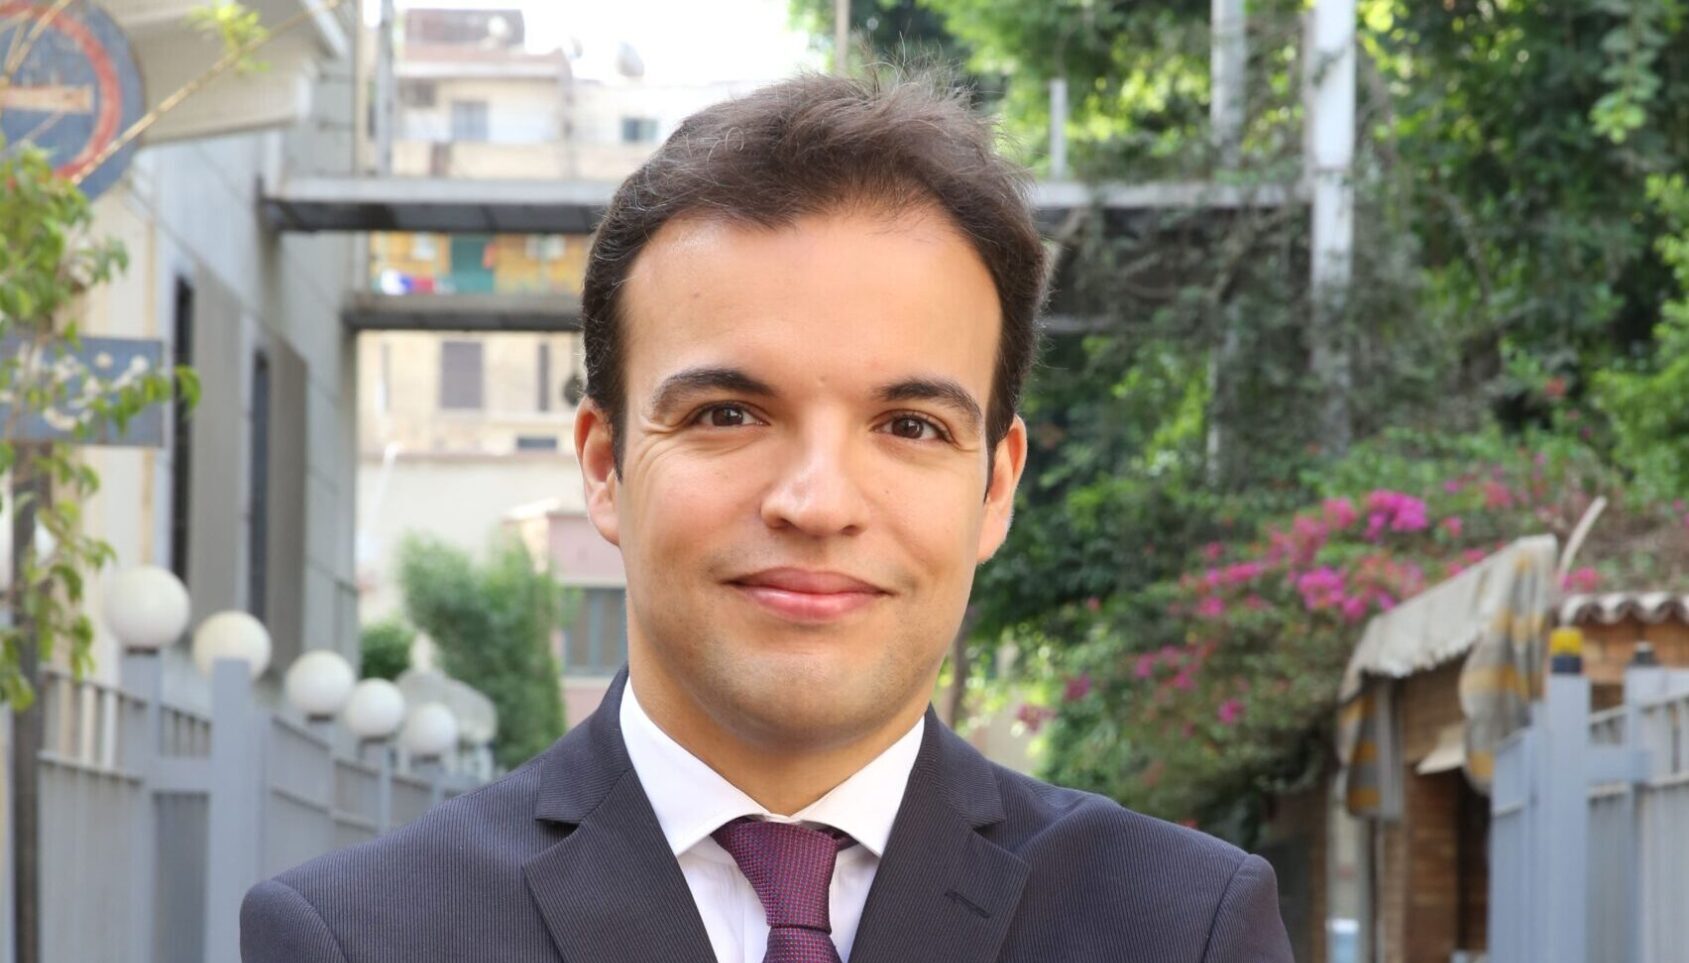 Mohamed Bouabdallah appointed Cultural Counselor of France  in the United States and Director of Villa Albertine